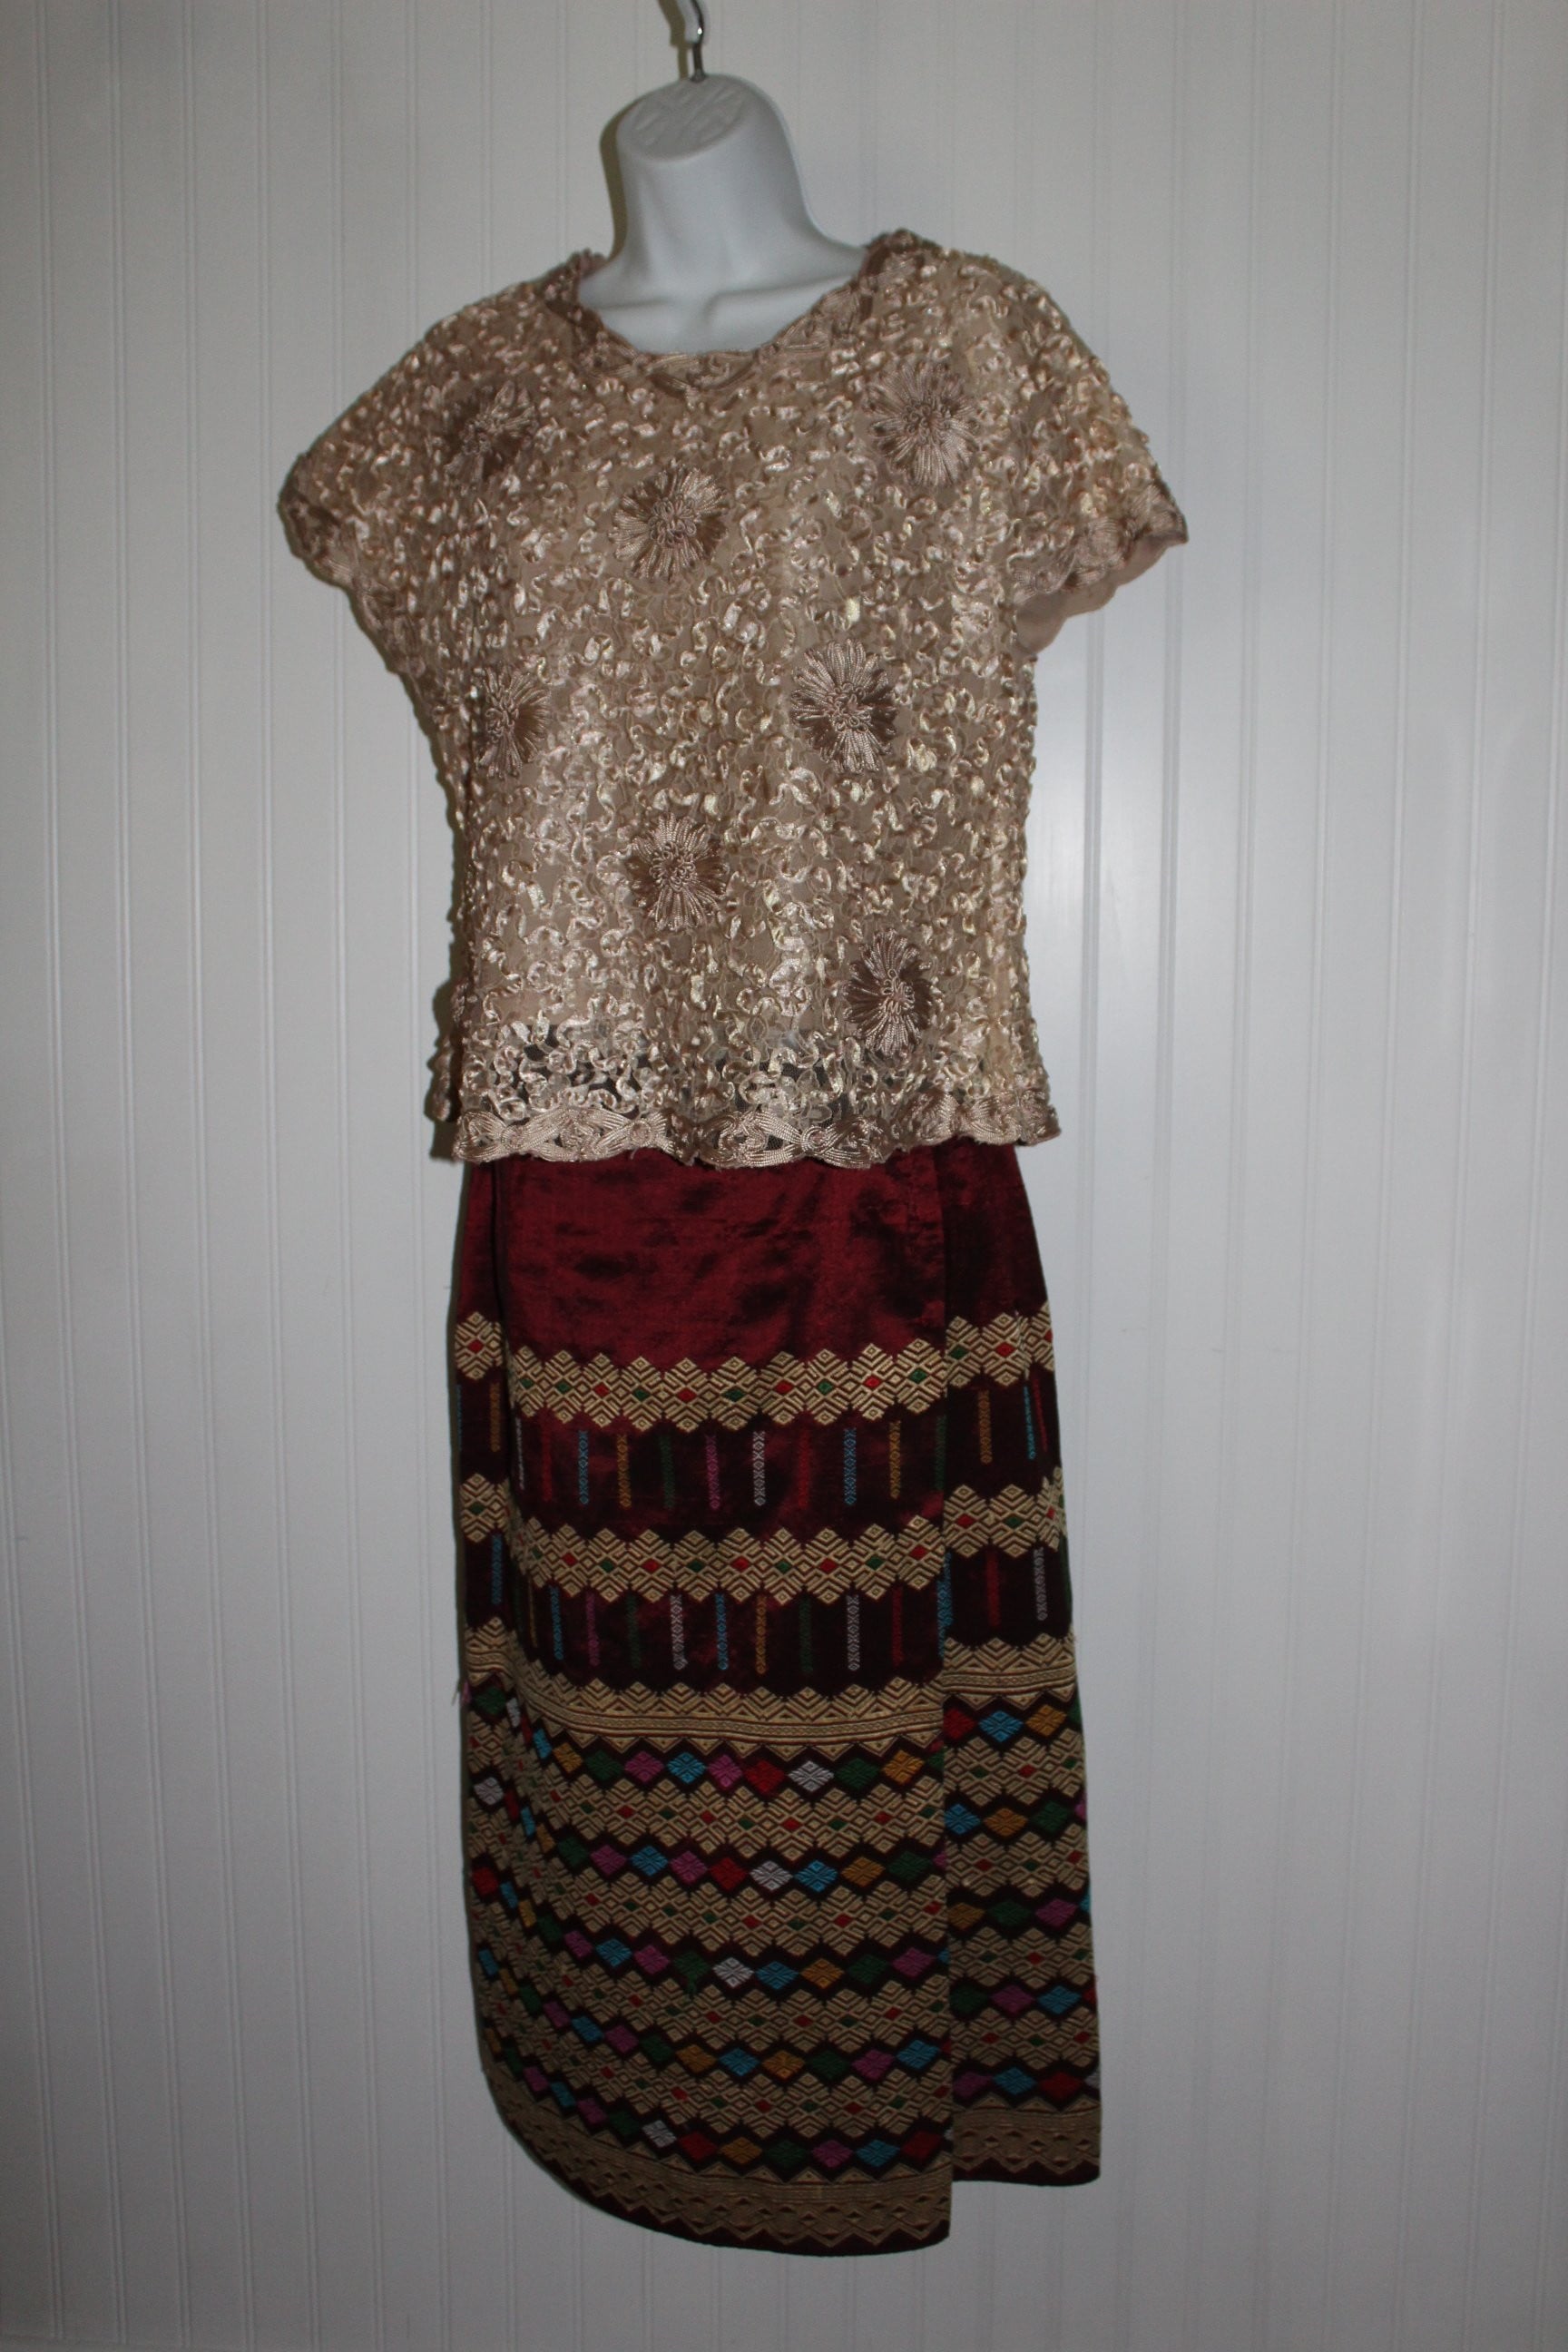 Thailand 2 Piece Wrap Skirt Woven Gold Thread Ribbon Embroidered Top Authenticate Custom Made